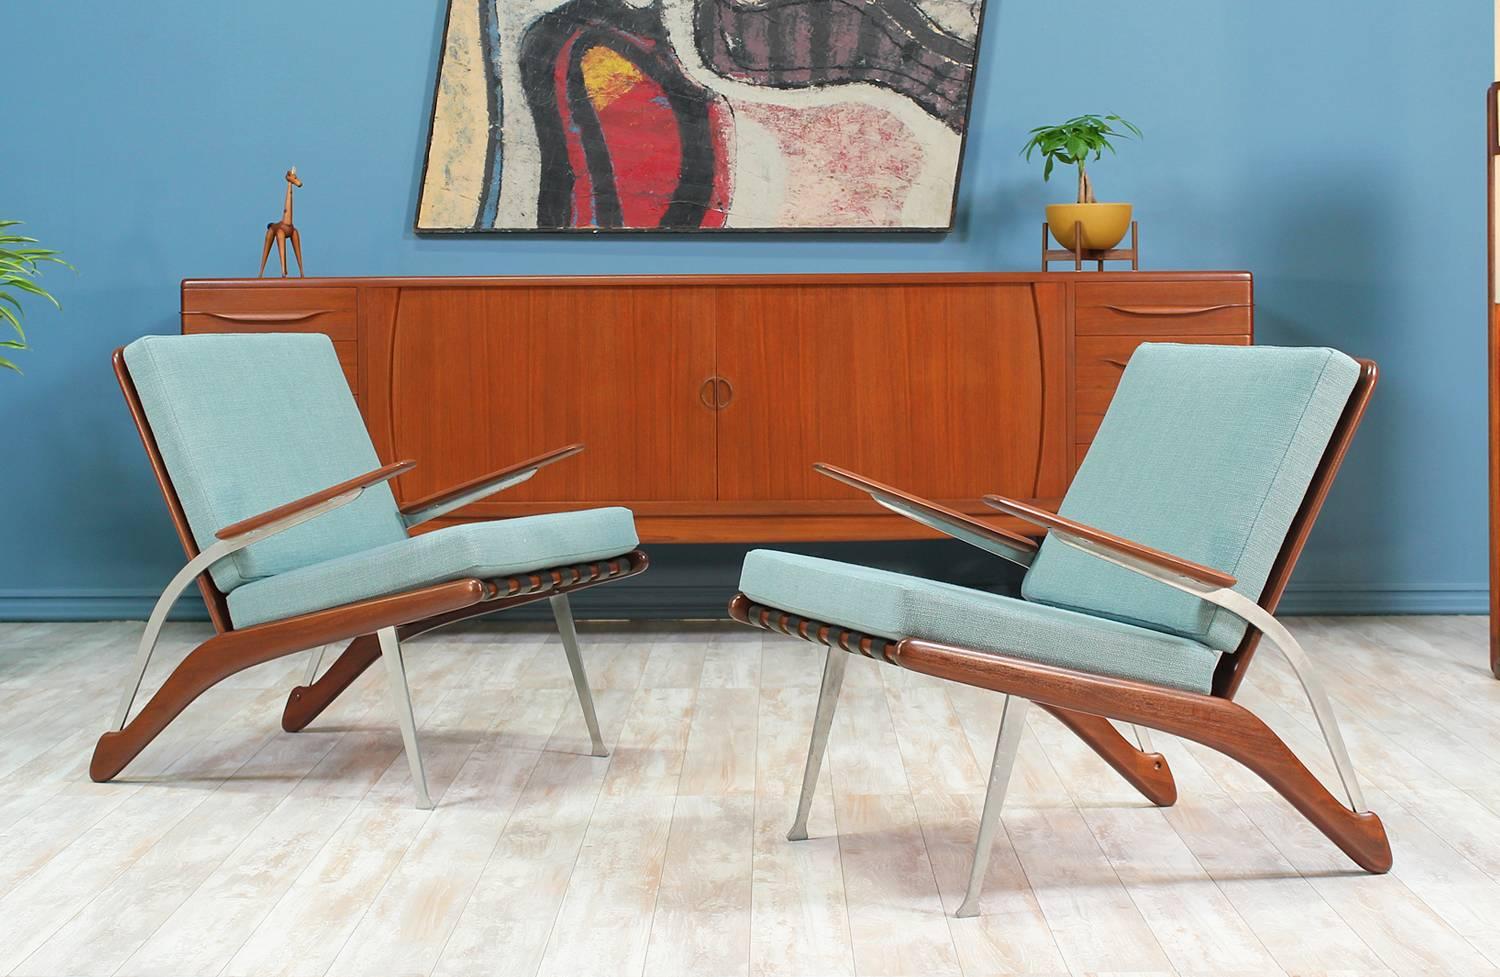 Mid Century Modern lounge chairs designed and manufactured in the United States circa 1960’s. Featuring a sculpturally carved teak wood combined with a steel frame, which shows light patina. The new high-density cushions have been upholstered in a